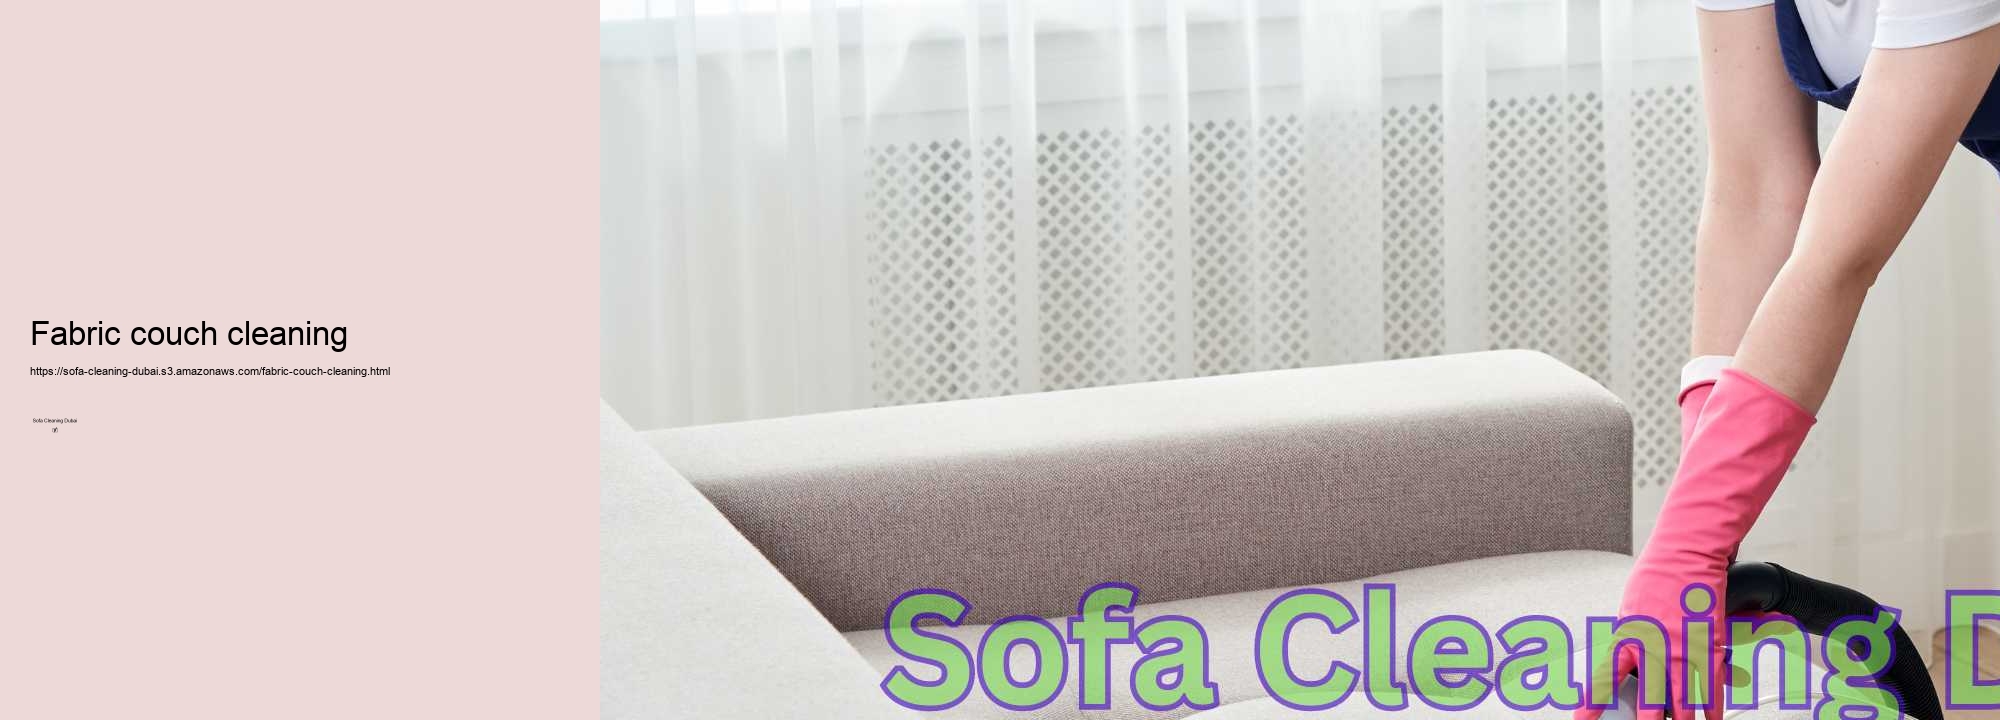 Fabric couch cleaning